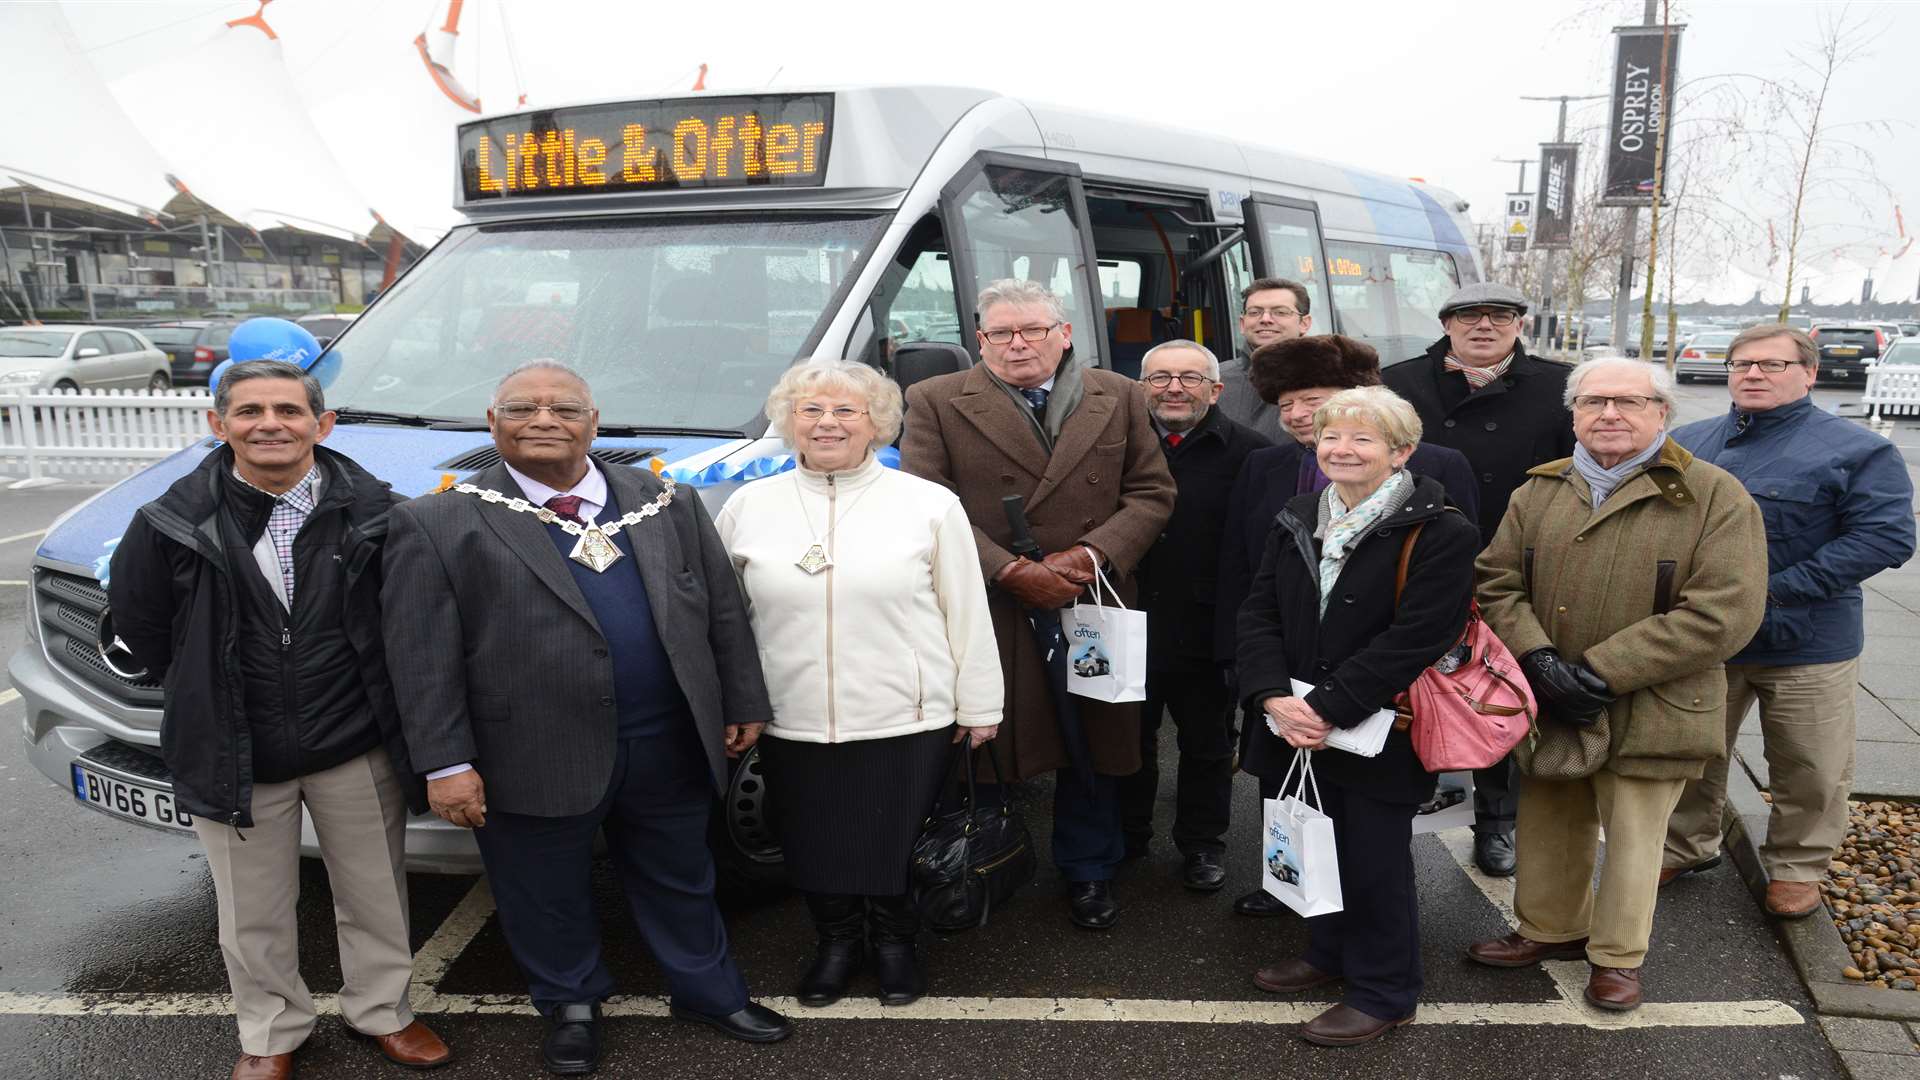 Mayor of Ashford George Koowaree with Mayoress Gloria Champion and councillors Launch of the 'Little and Often' Stagecoach minibus service